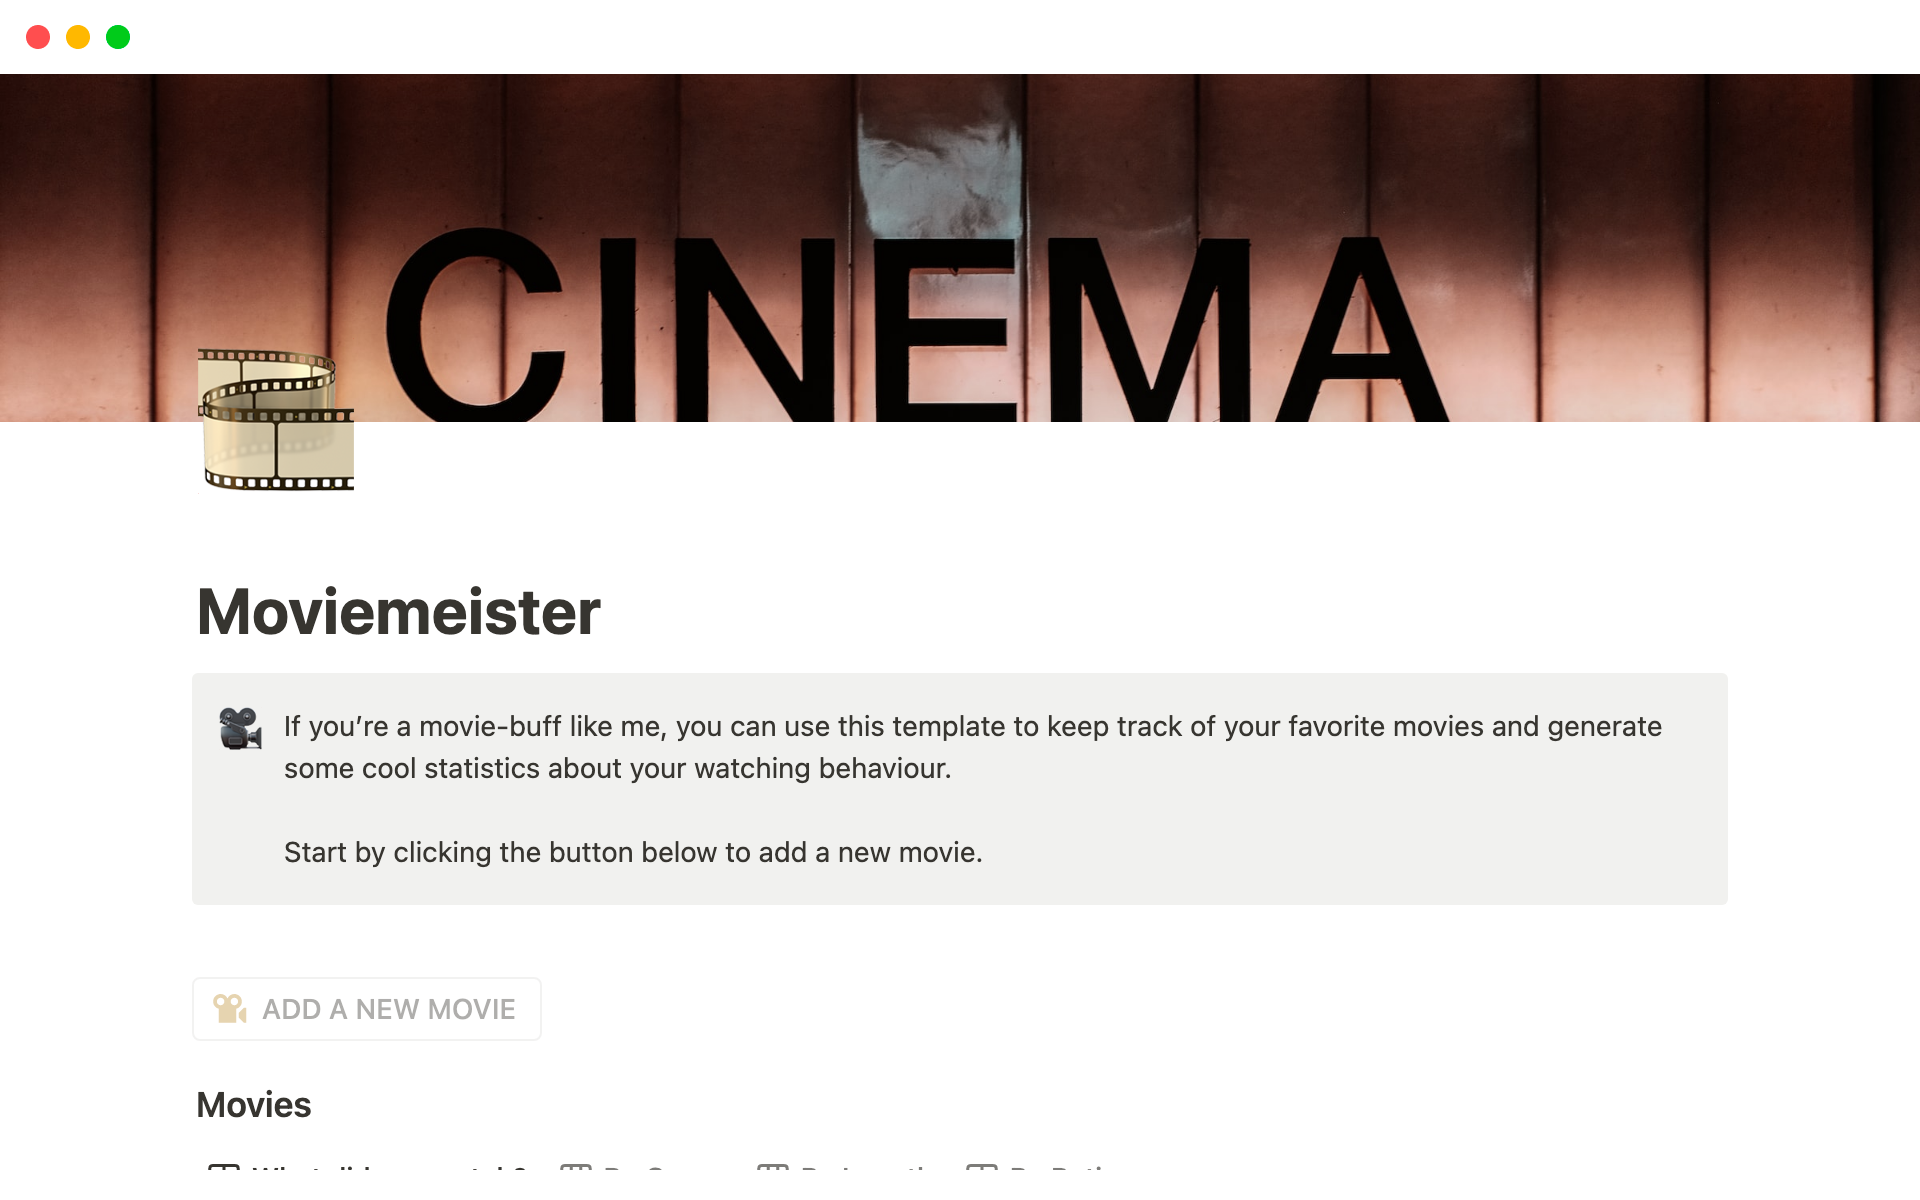 MovieMeister helps you keep track of all movies you've watched and visualizes all kinds of information on your viewing habits.